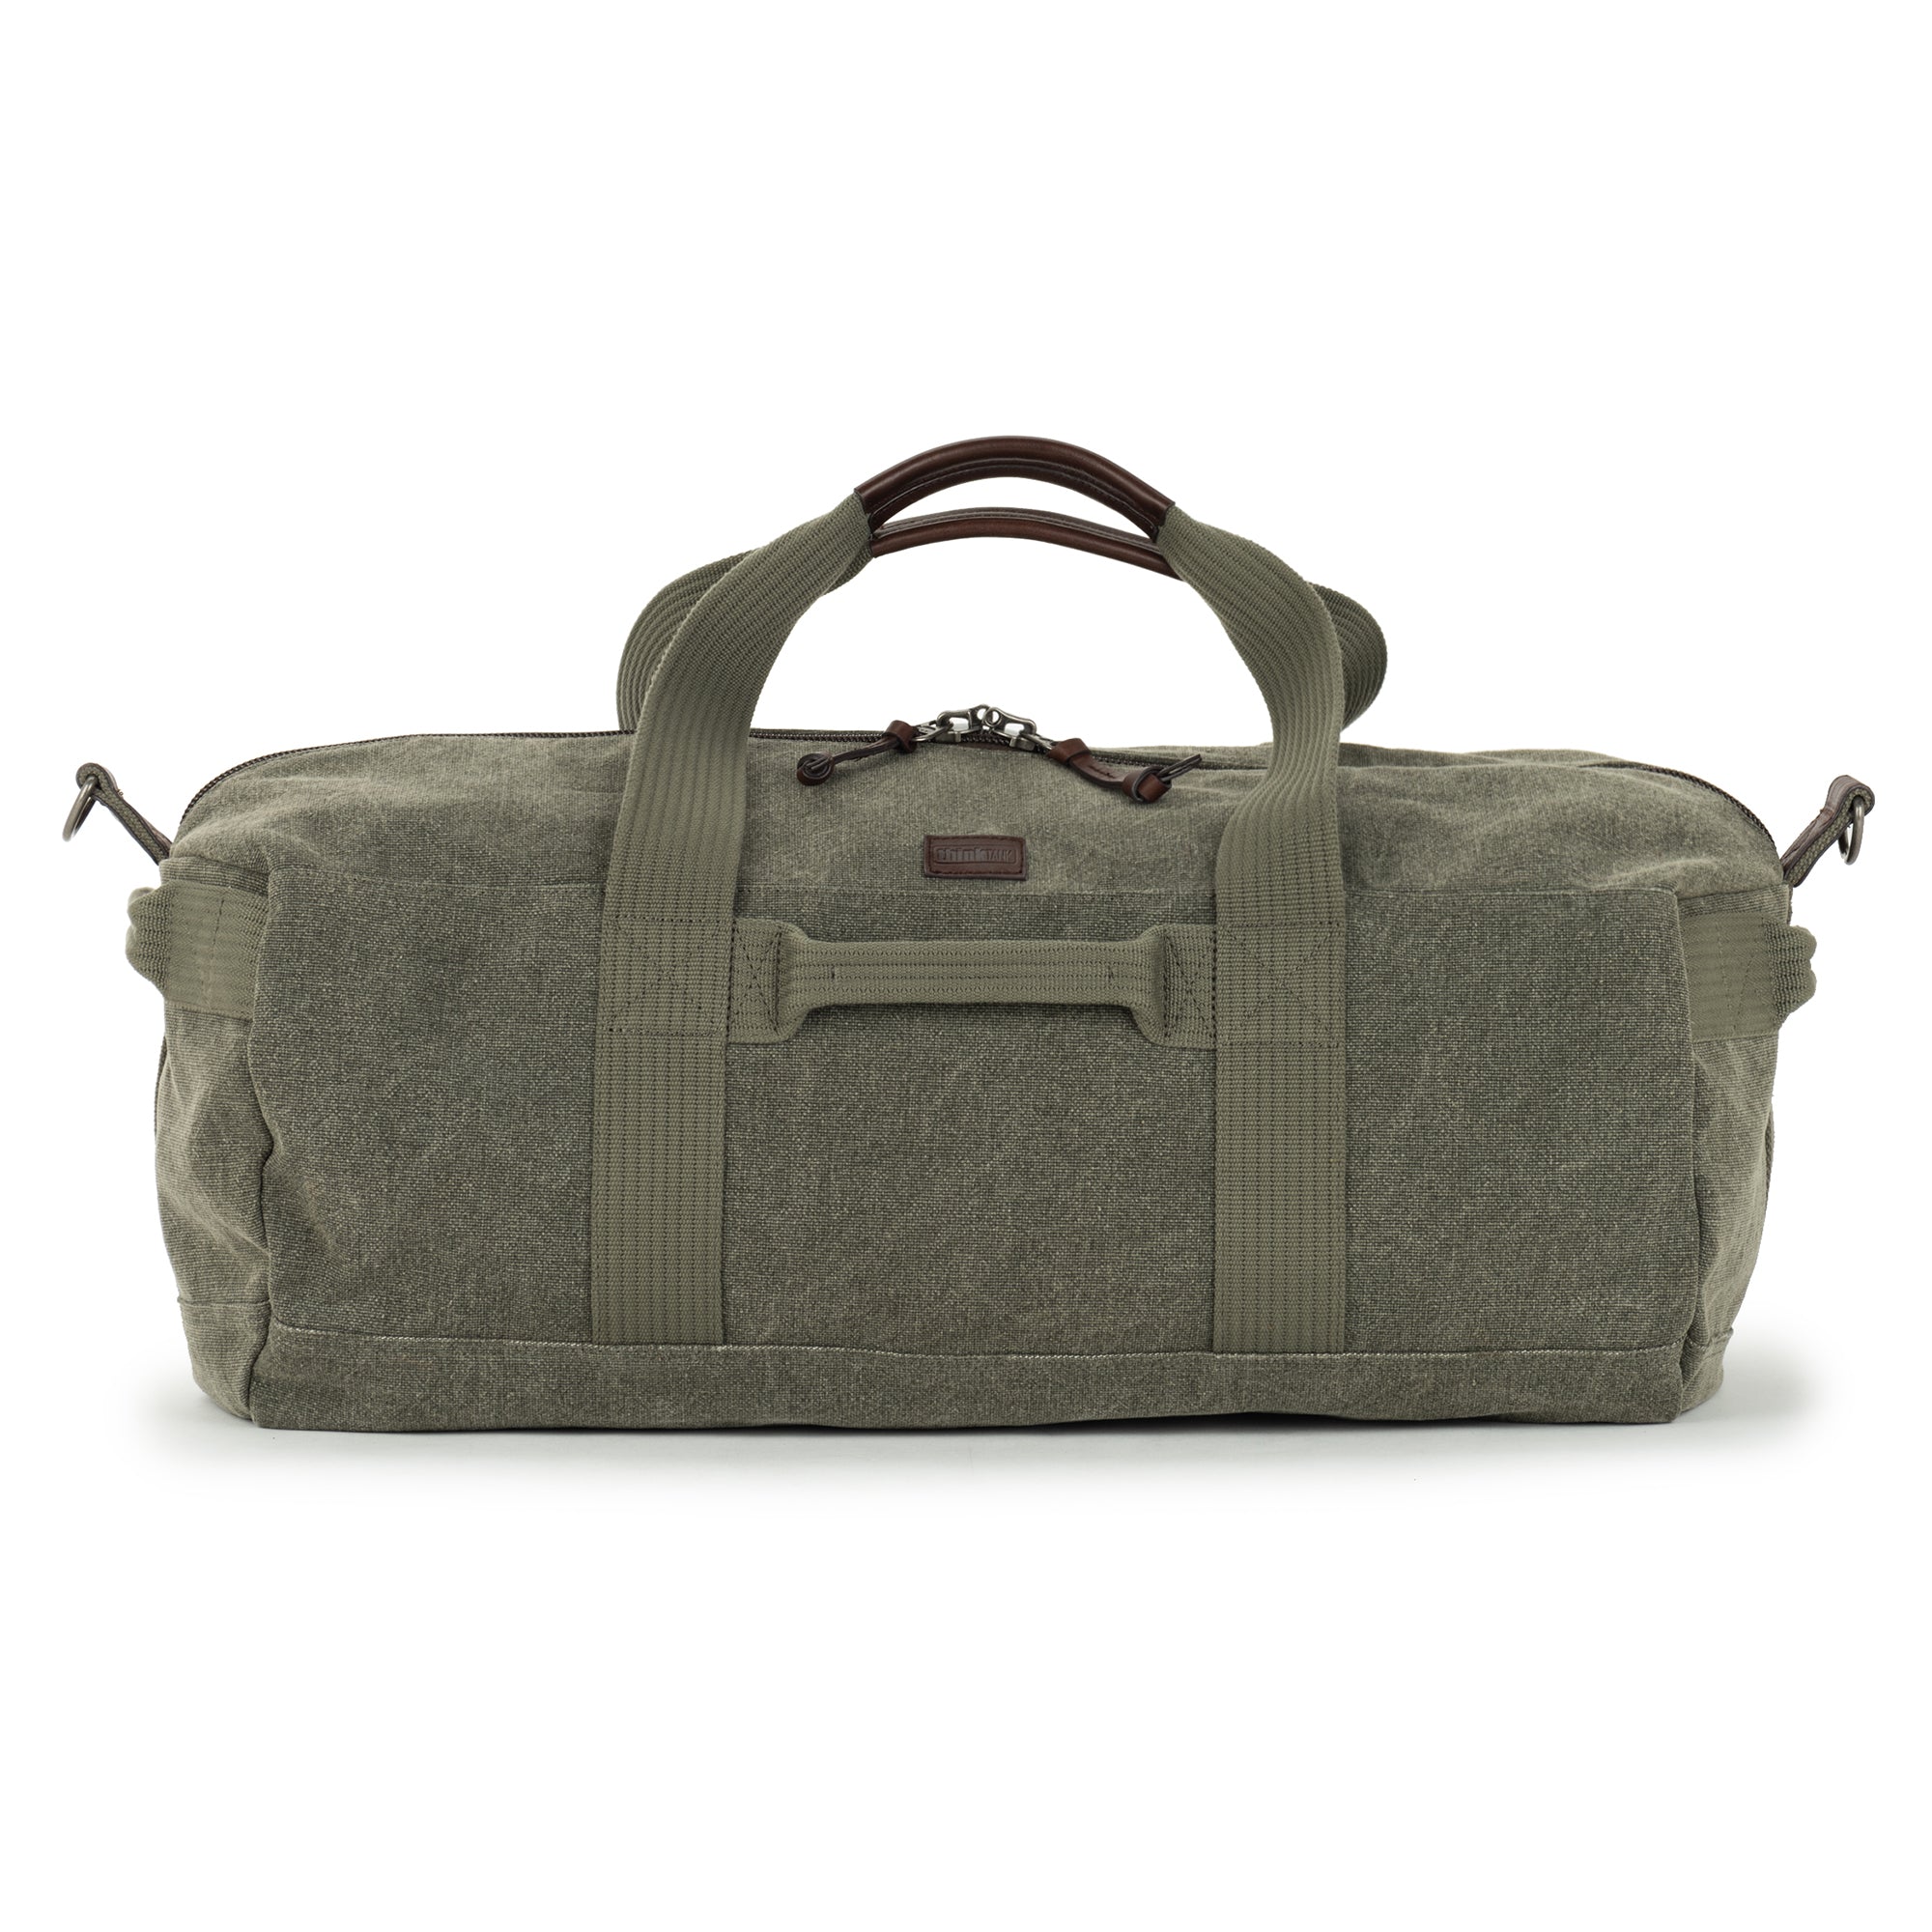 Stone-washed 100% cotton canvas is soft and rugged with a refined appearance